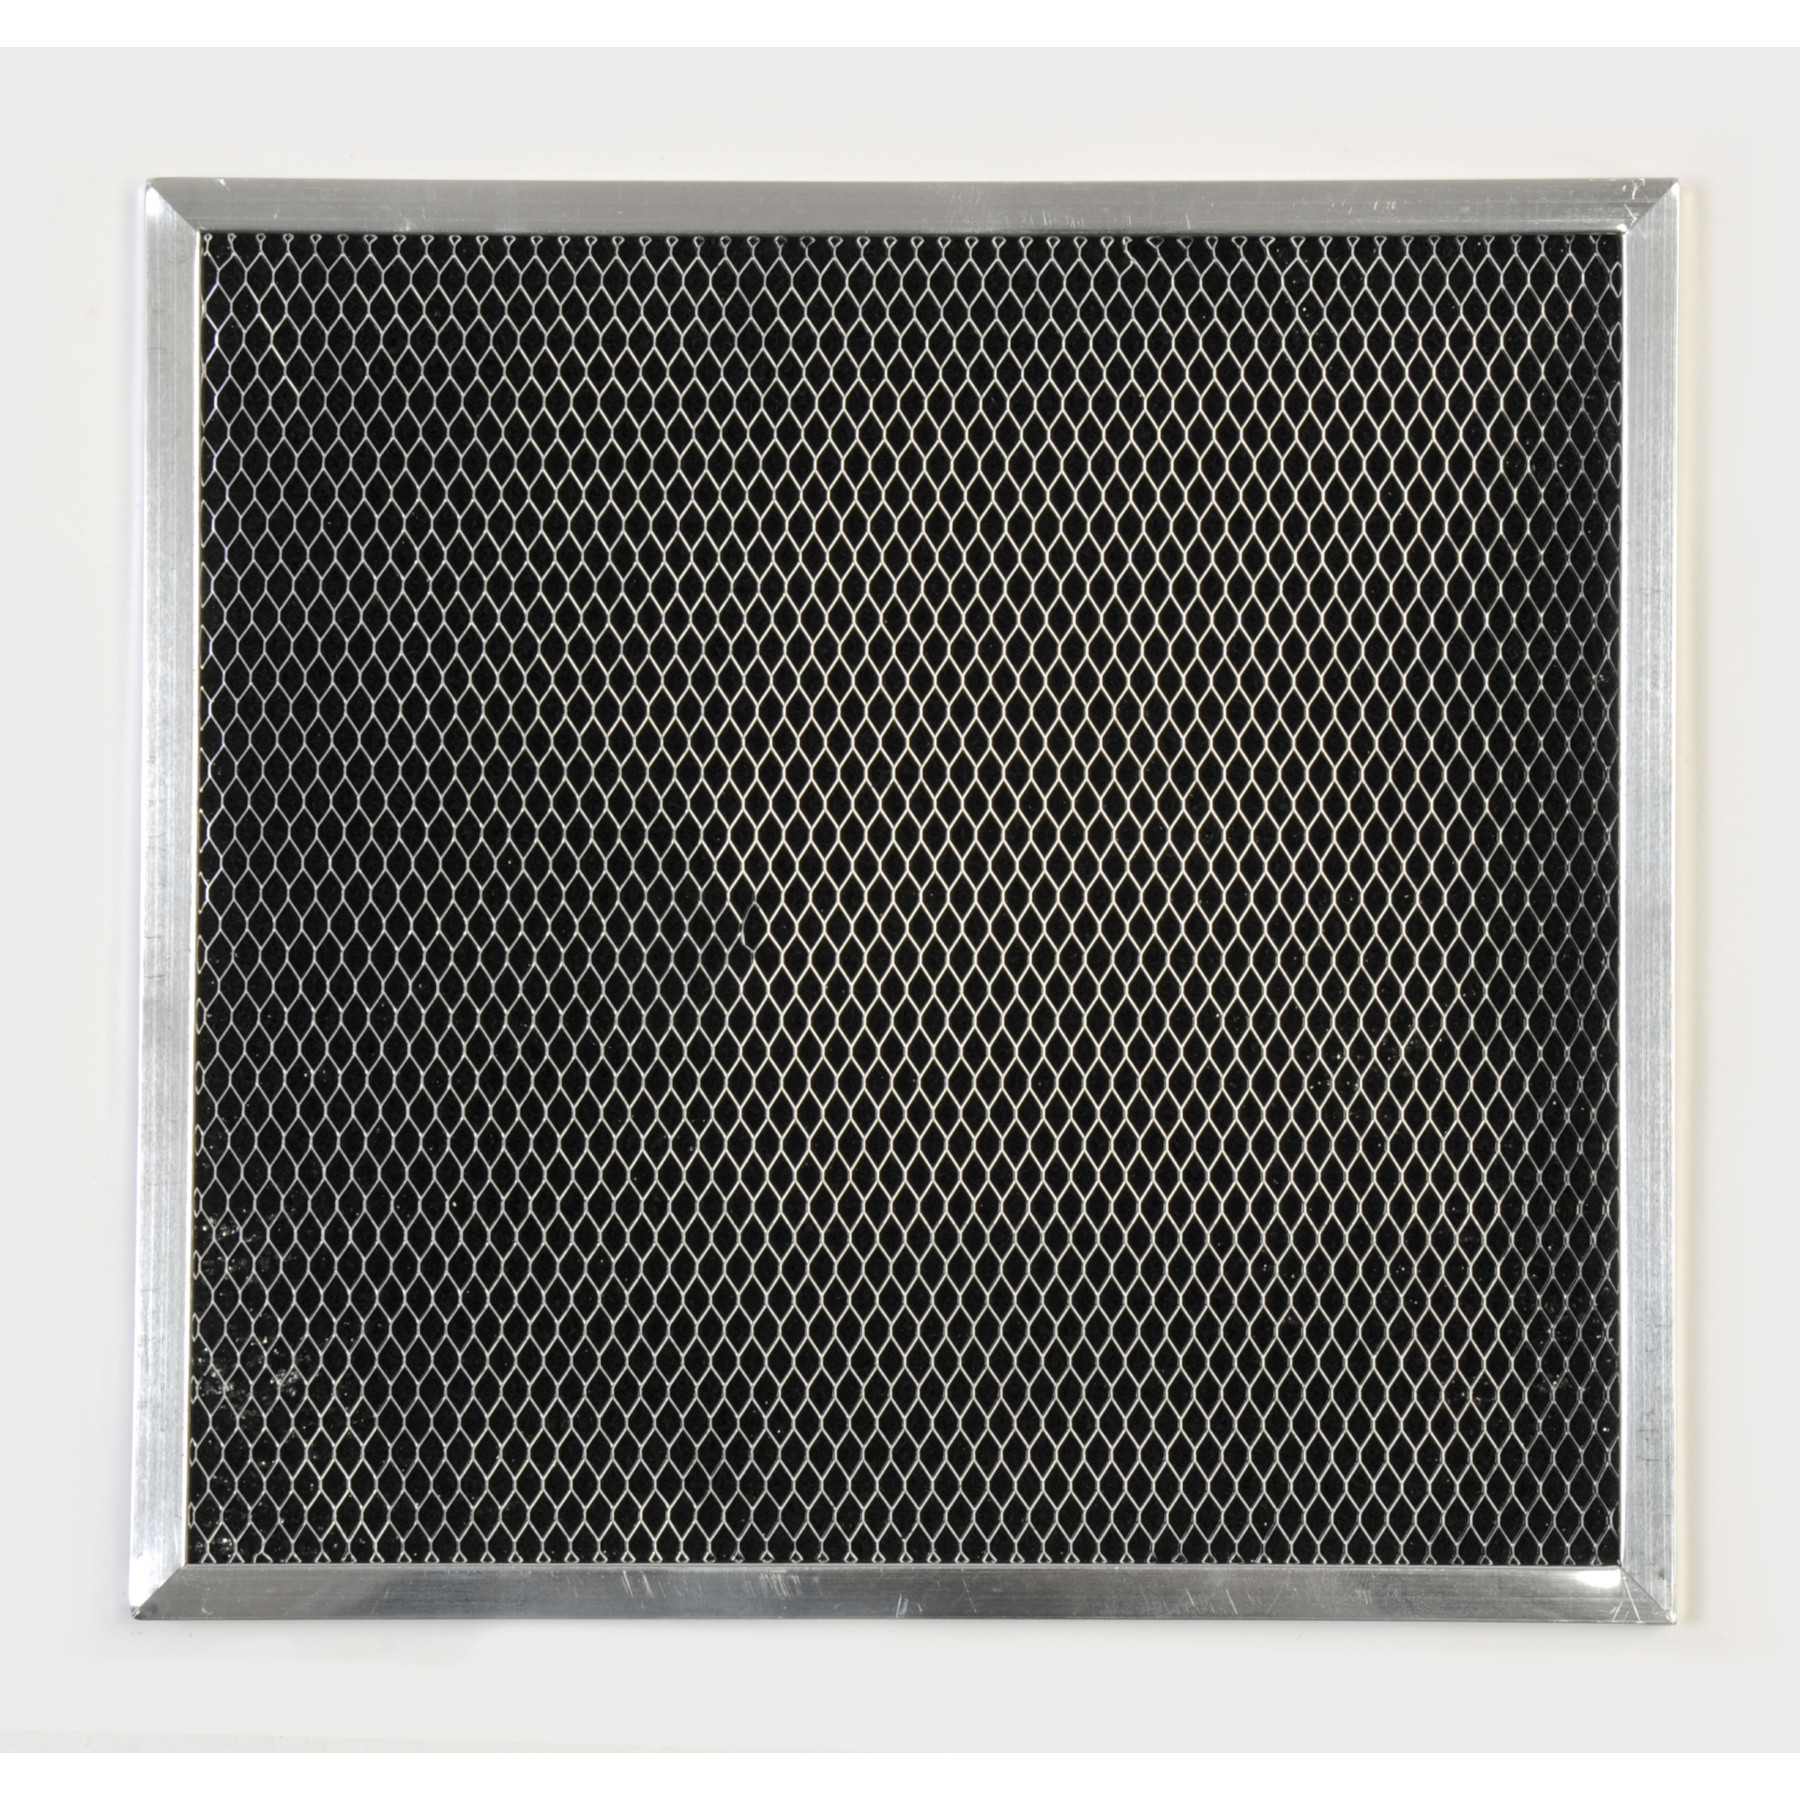 Replacement charcoal filter for QT range hood series